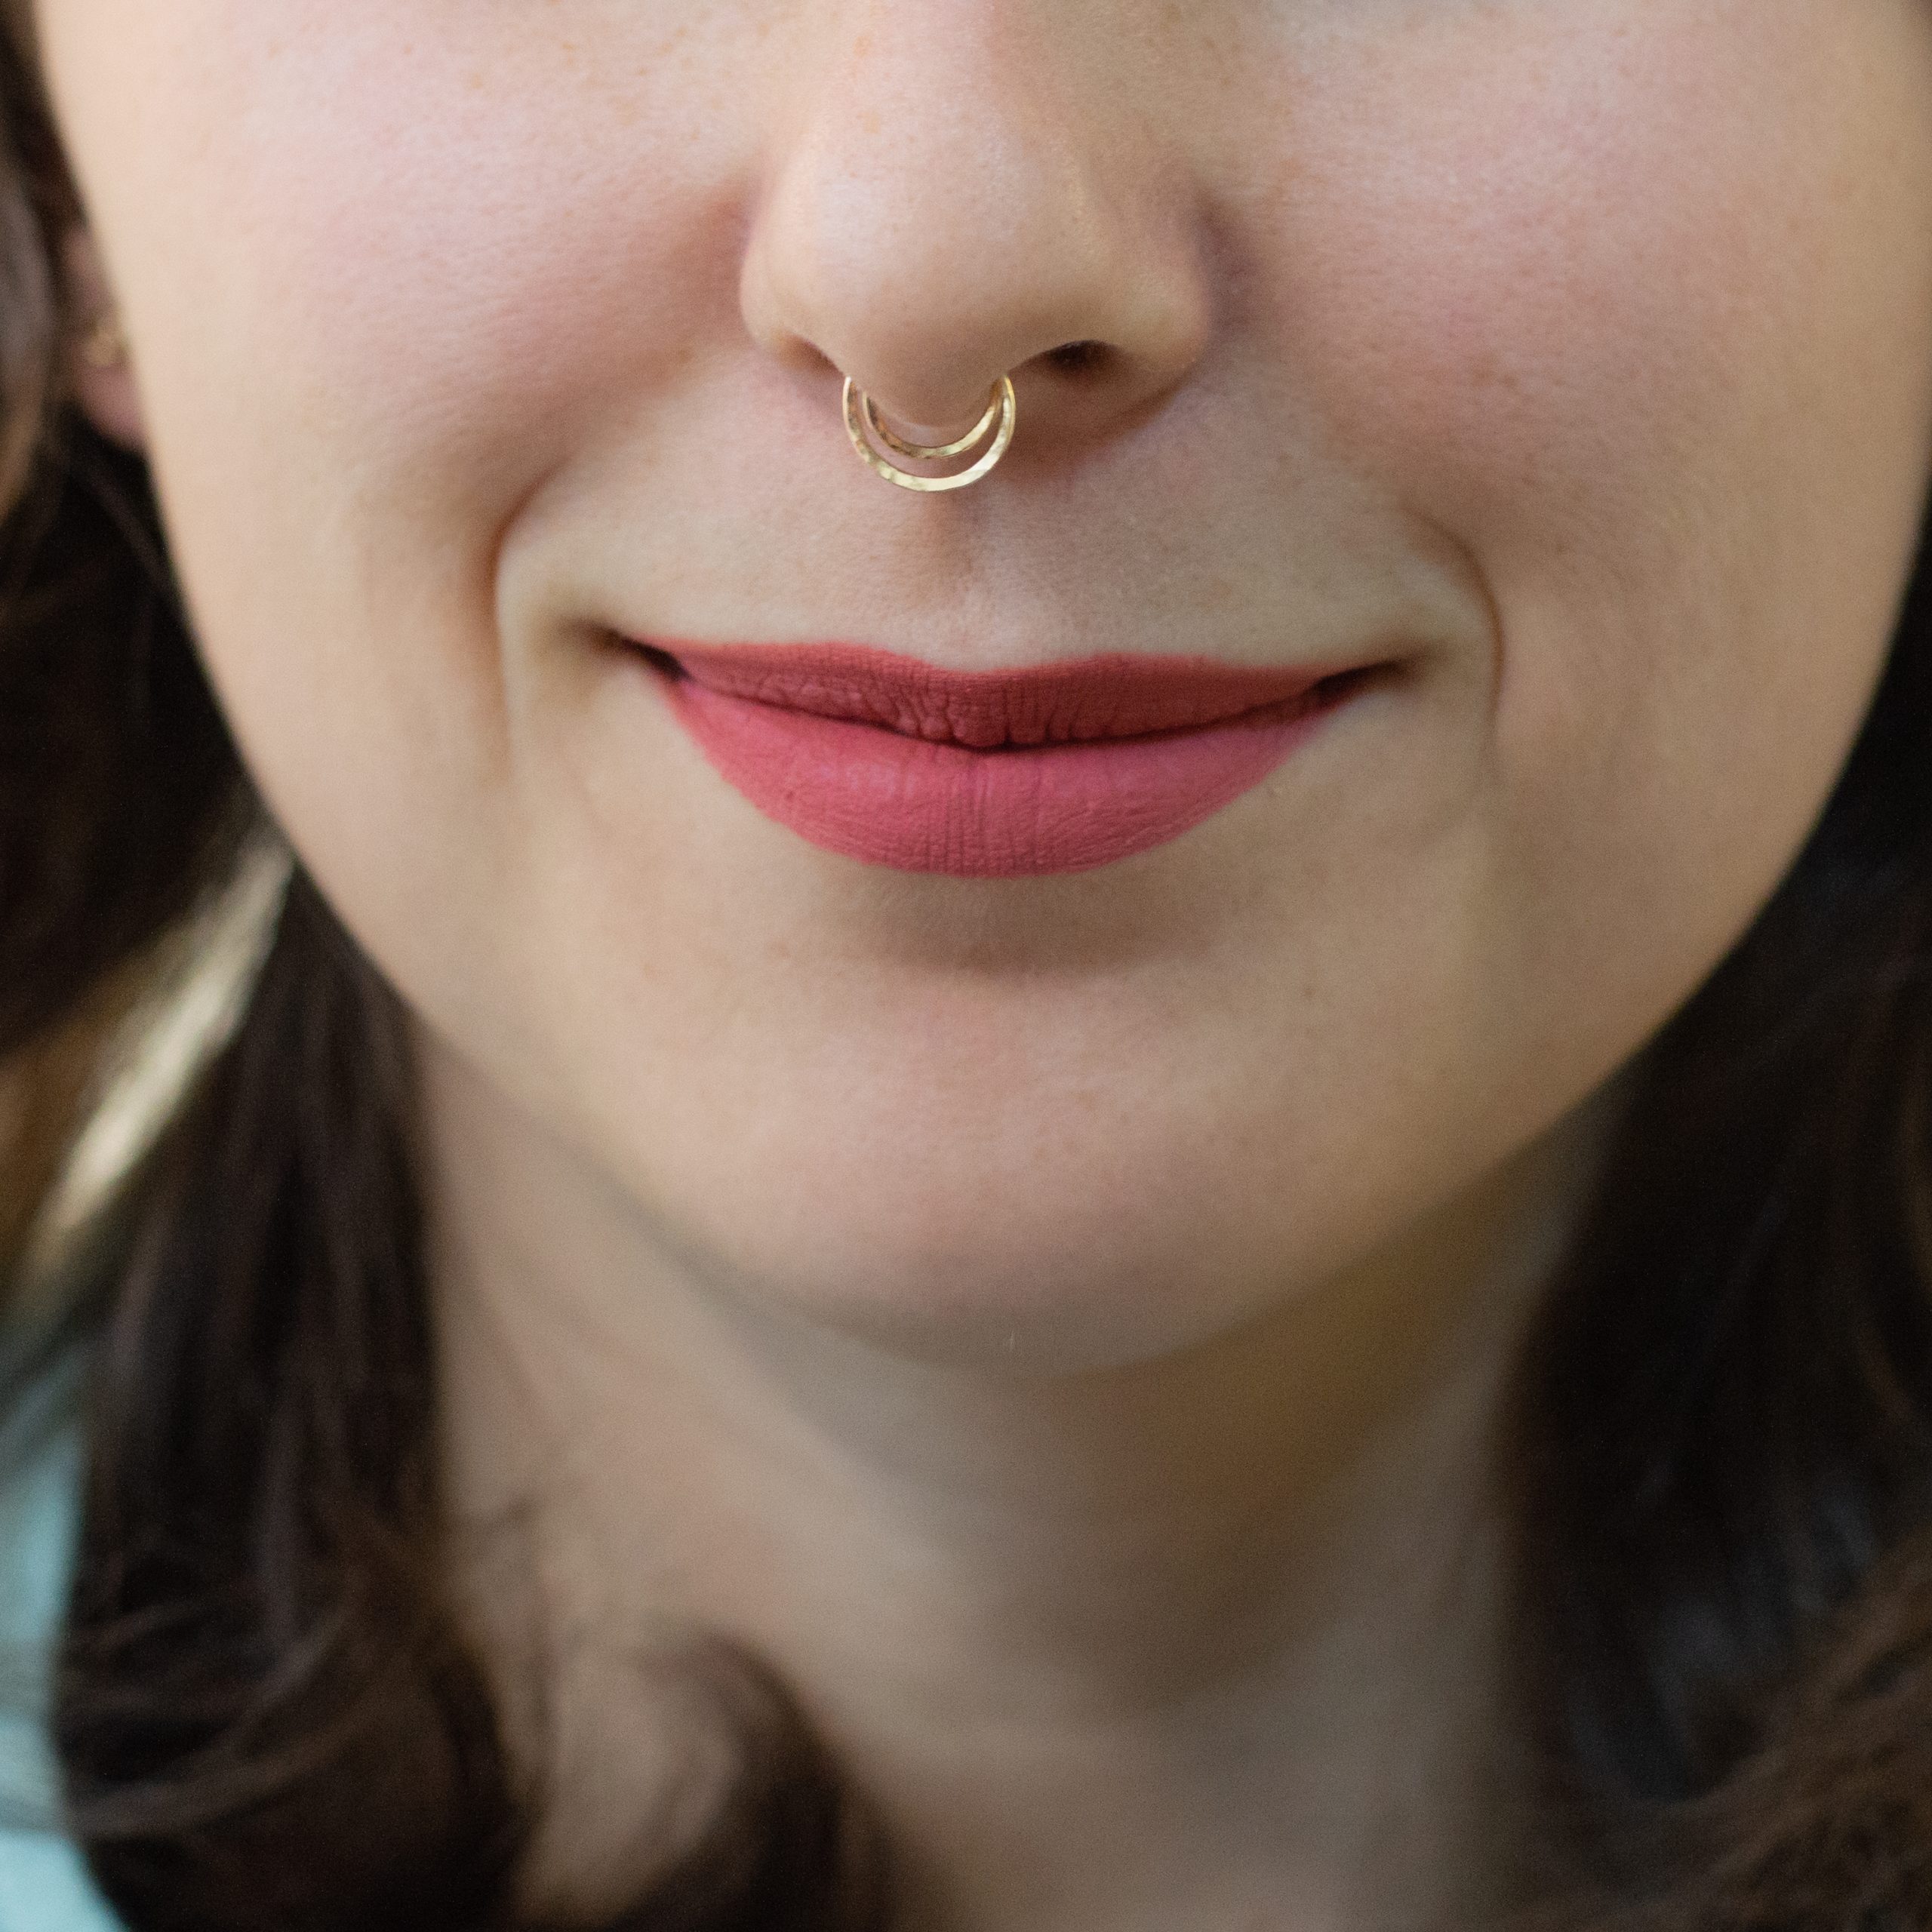 Buy Nose Rings No Piercing Needed, Fake Nose Ring, Faux Septum Ring, Fake  Lip Ring Online in India - Etsy